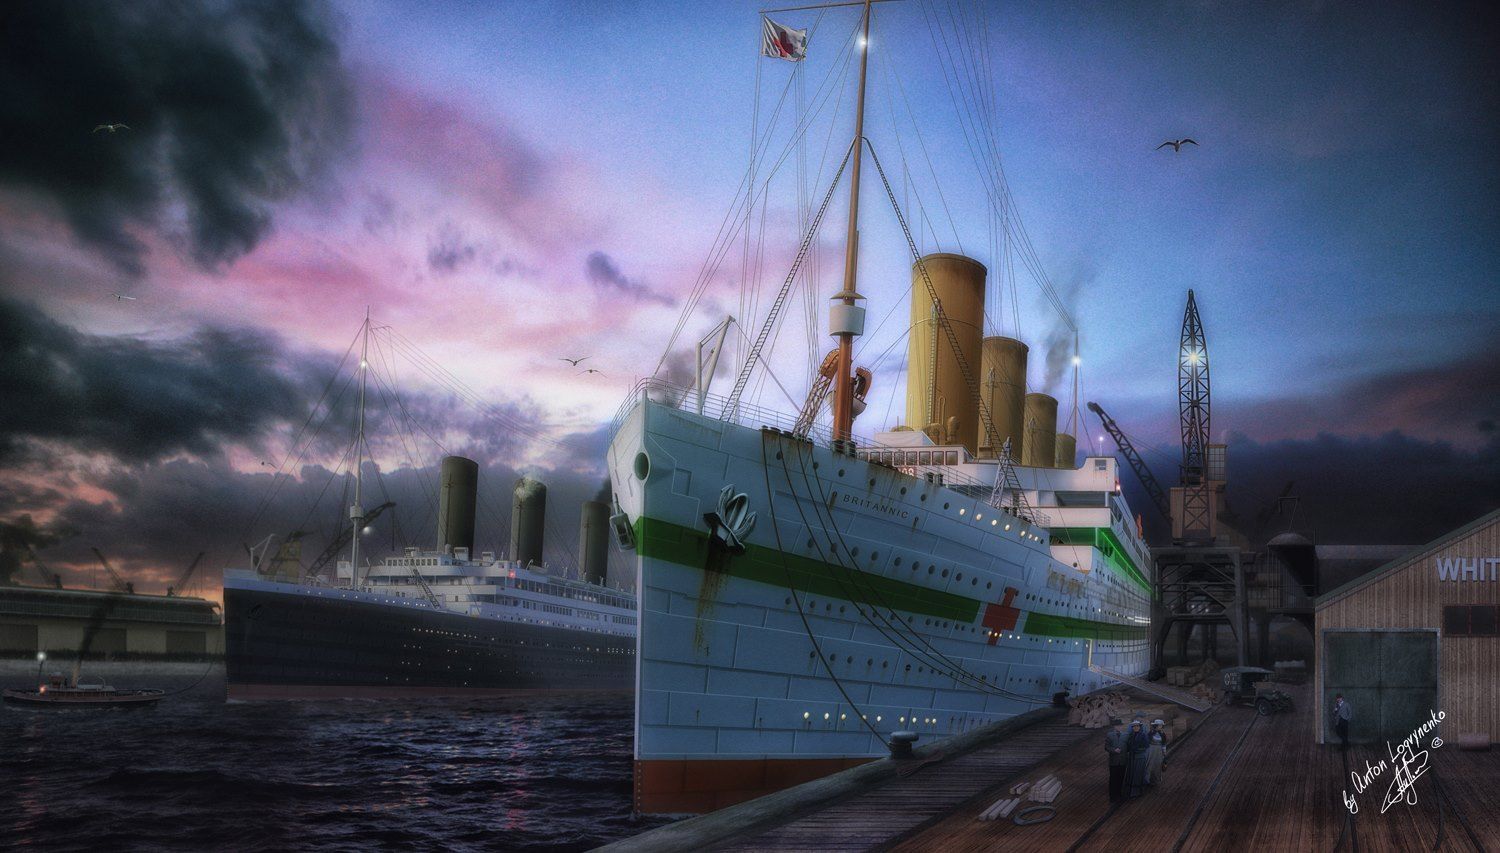 RMS Britannic 2 Screen wallpaper day by TheRonen on DeviantArt